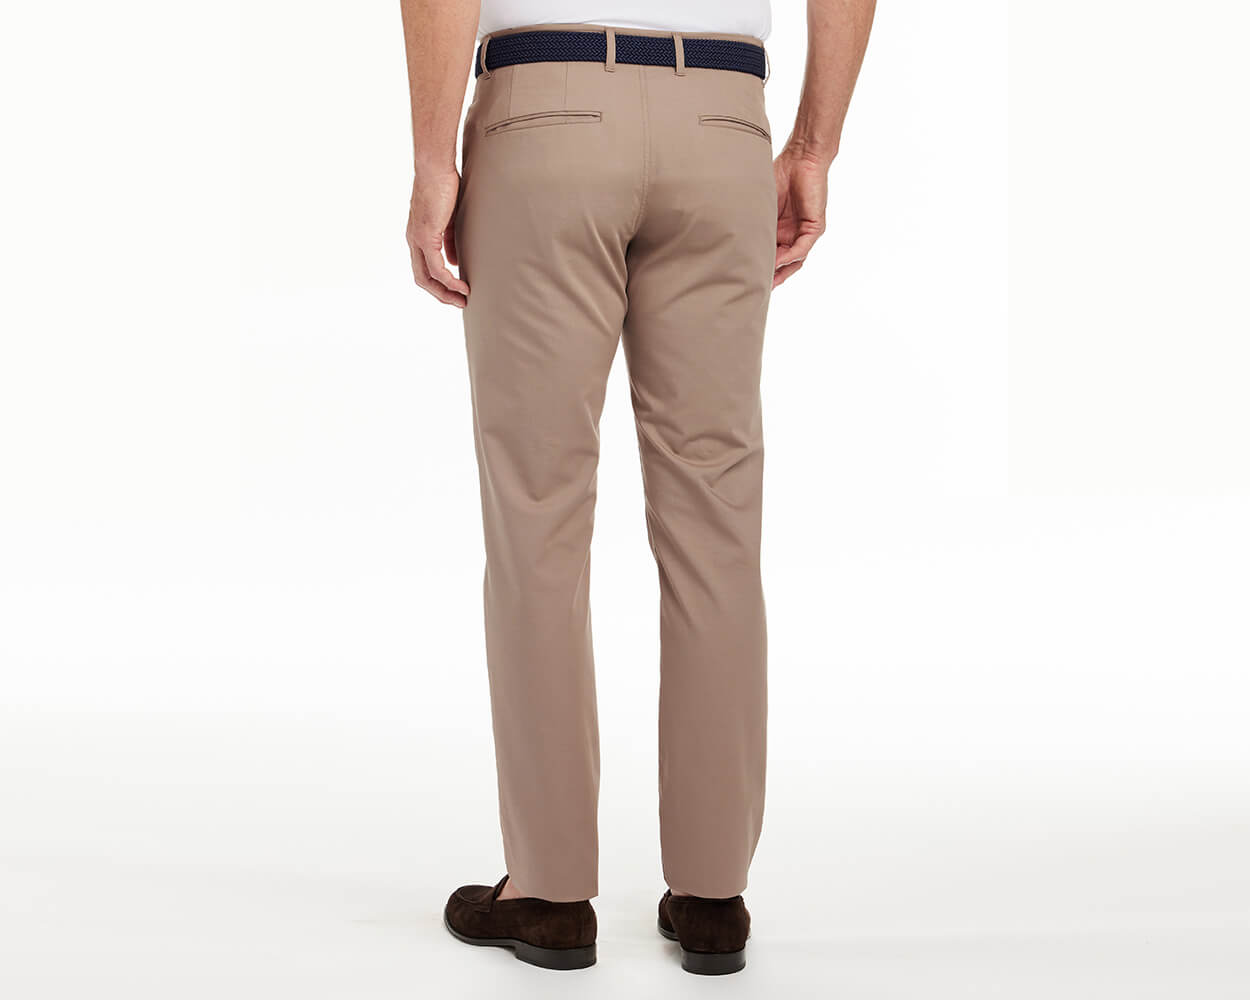 The Warner Pant: Fescue 34" Length